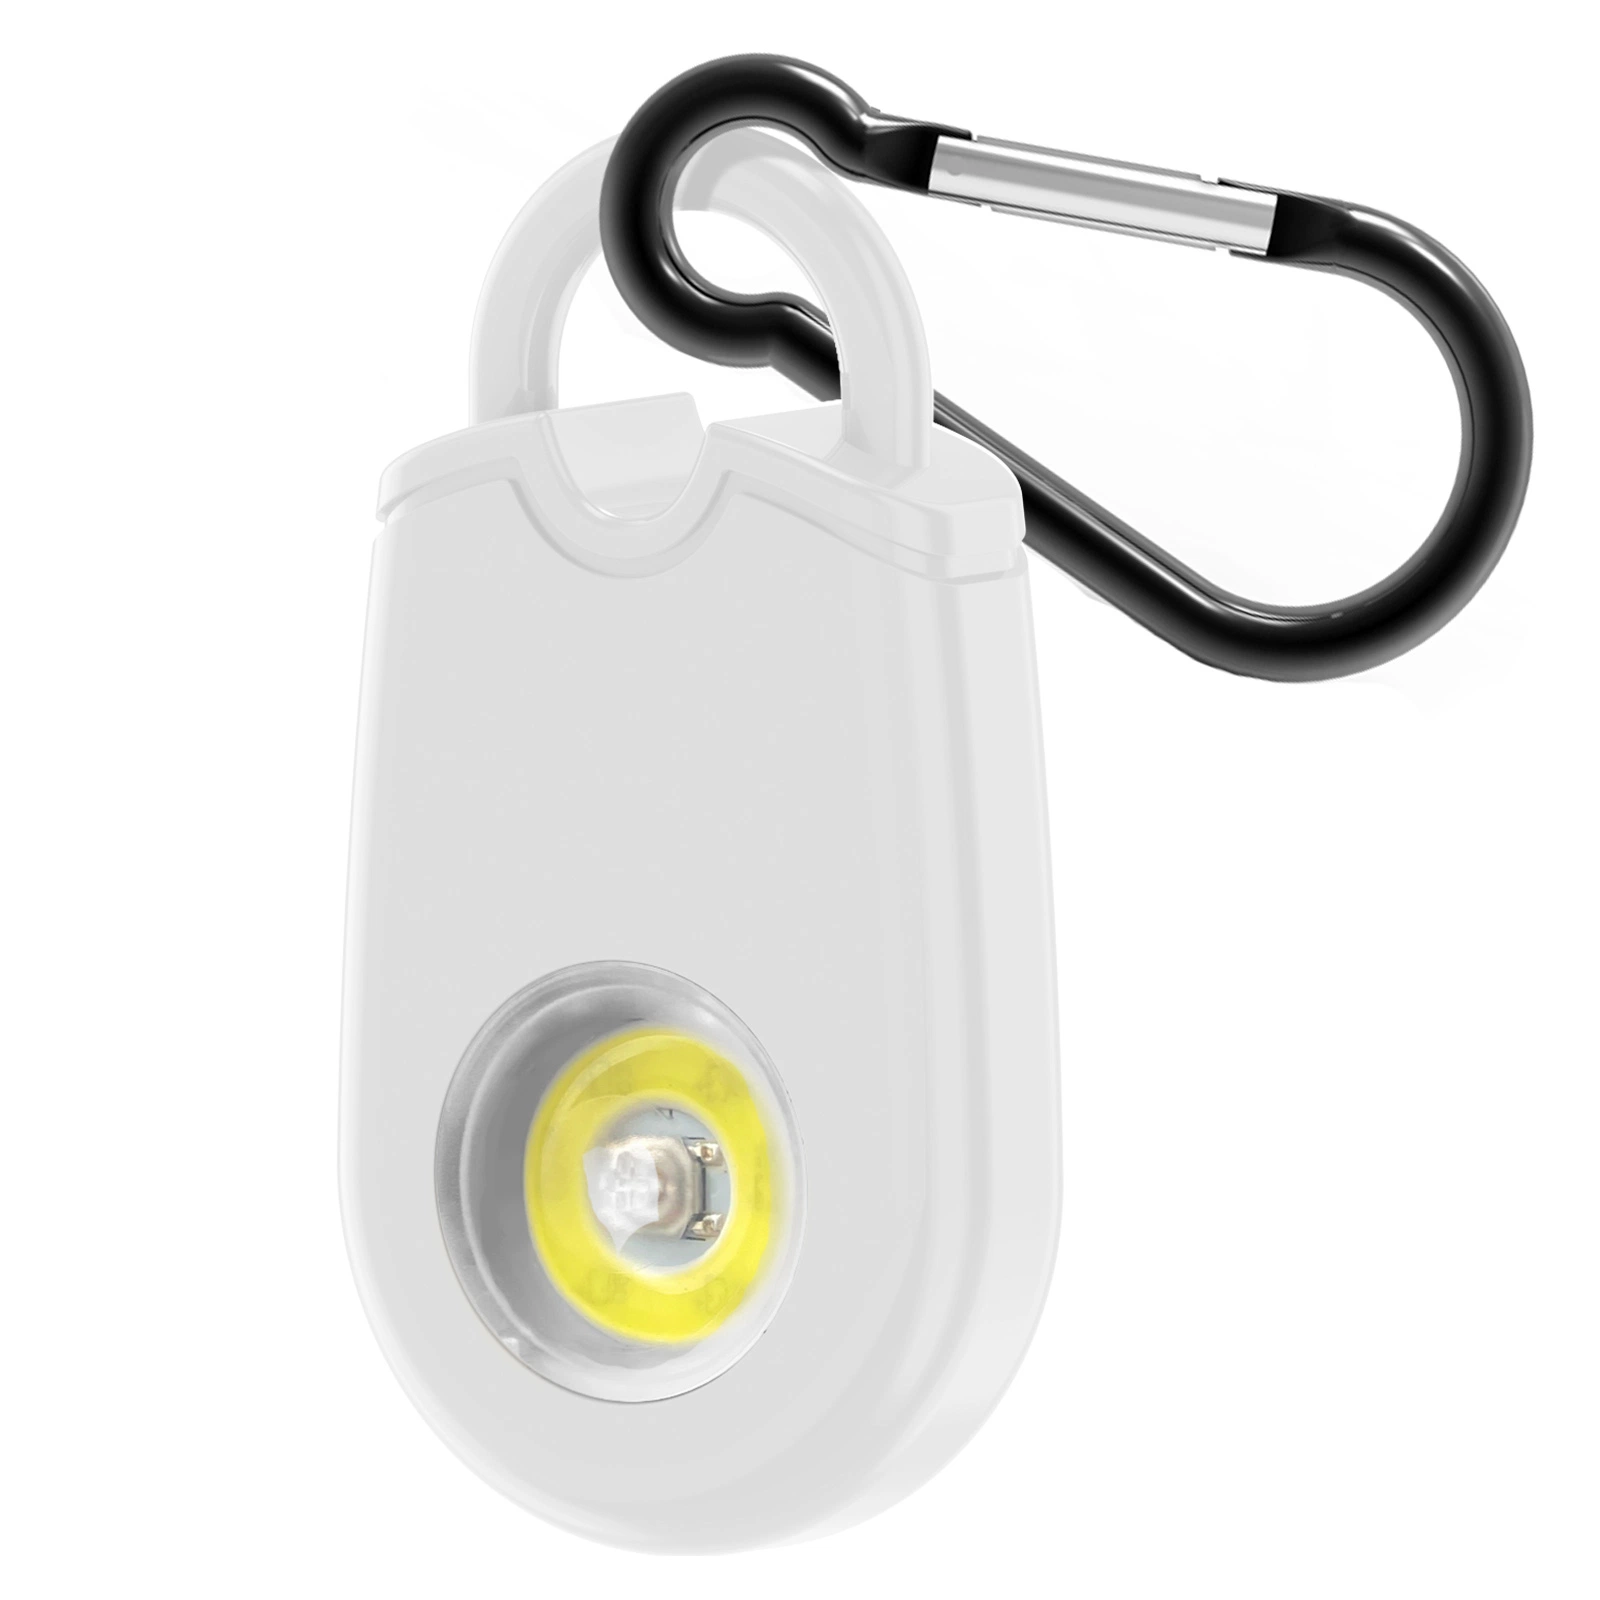 Emergency Safety Personal Alarm Protection Keychain for Women